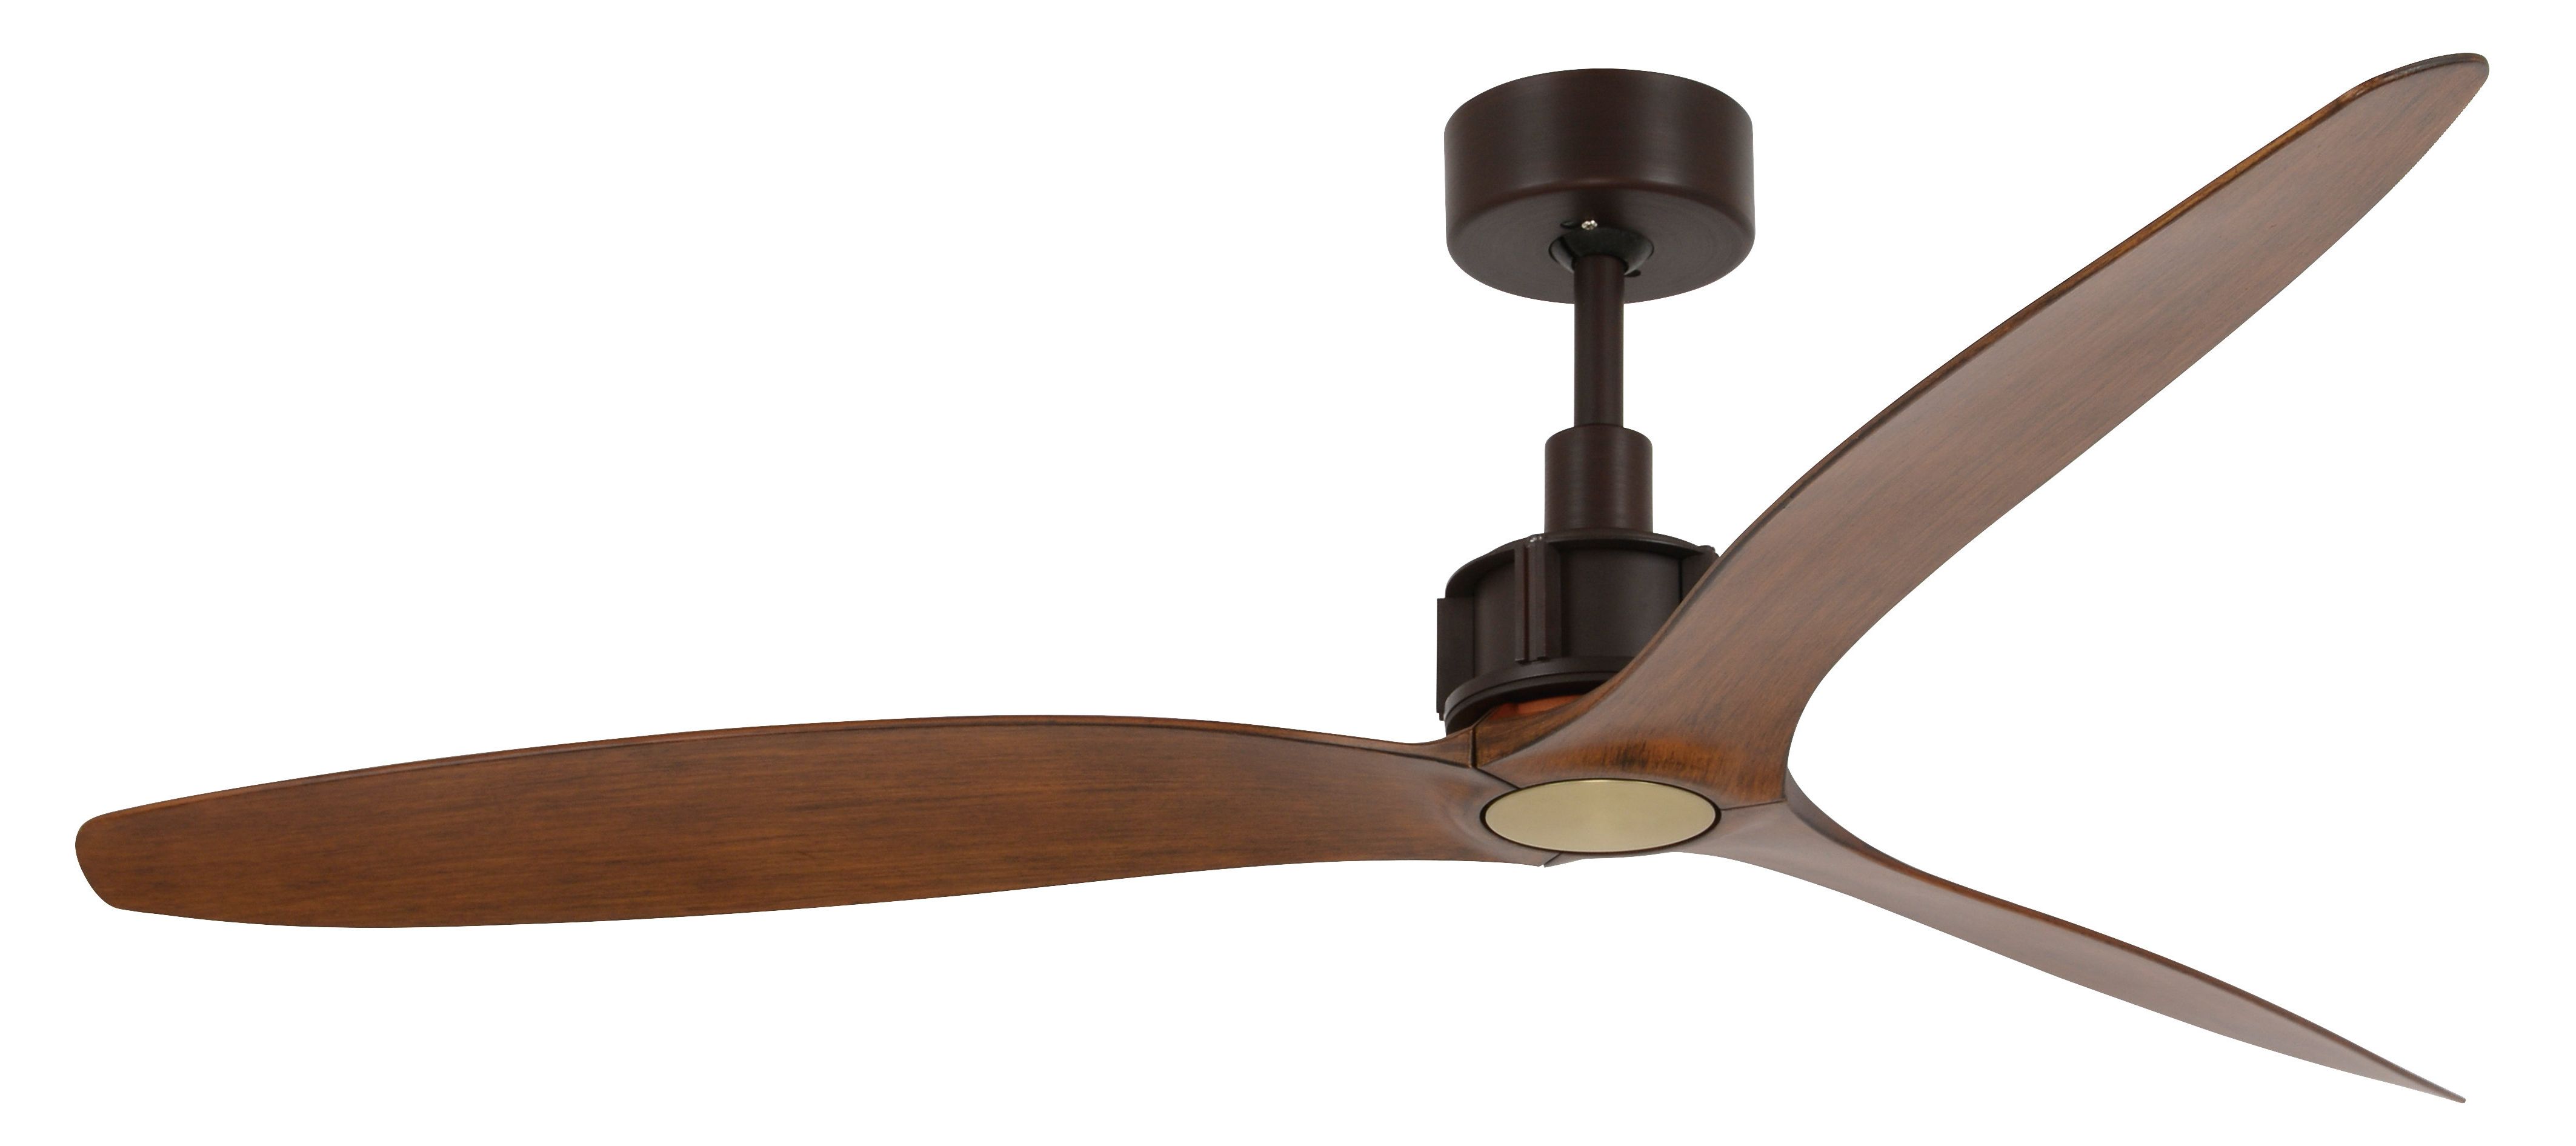 Allmodern With Regard To Most Recent Rainman 5 Blade Outdoor Ceiling Fans (View 11 of 20)